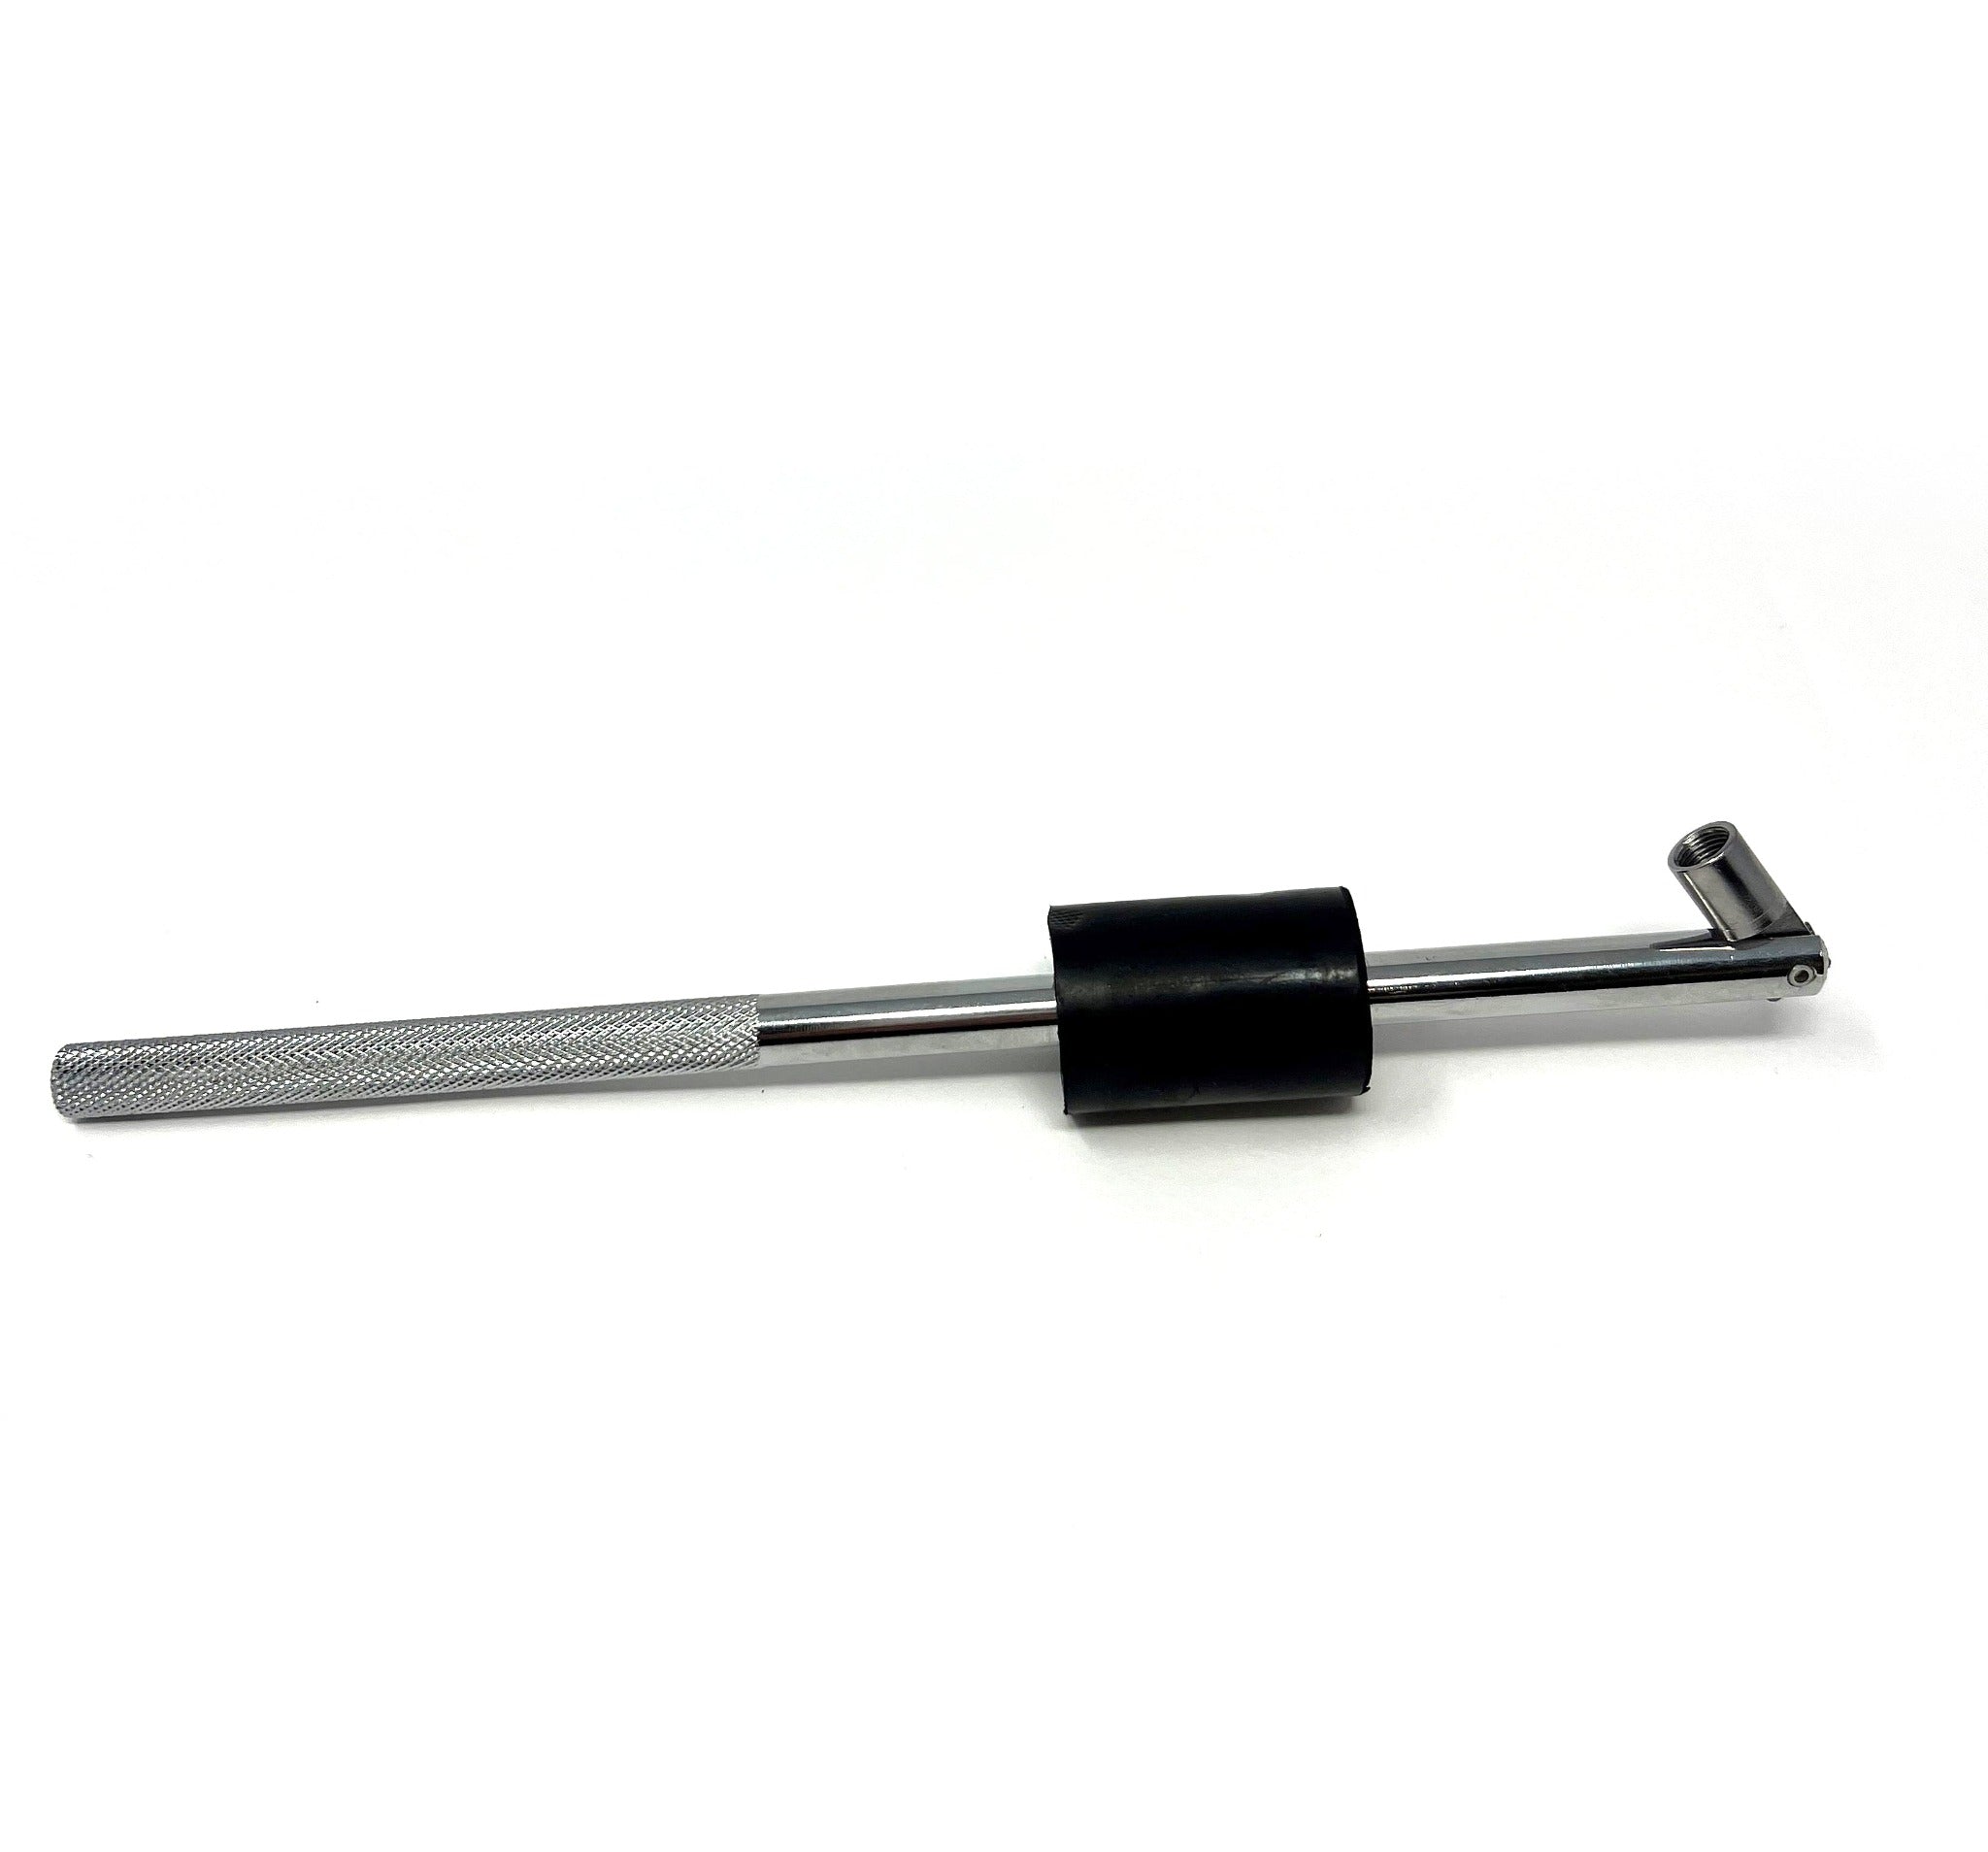 Chrome Coated Valve Puller/Installation Tool